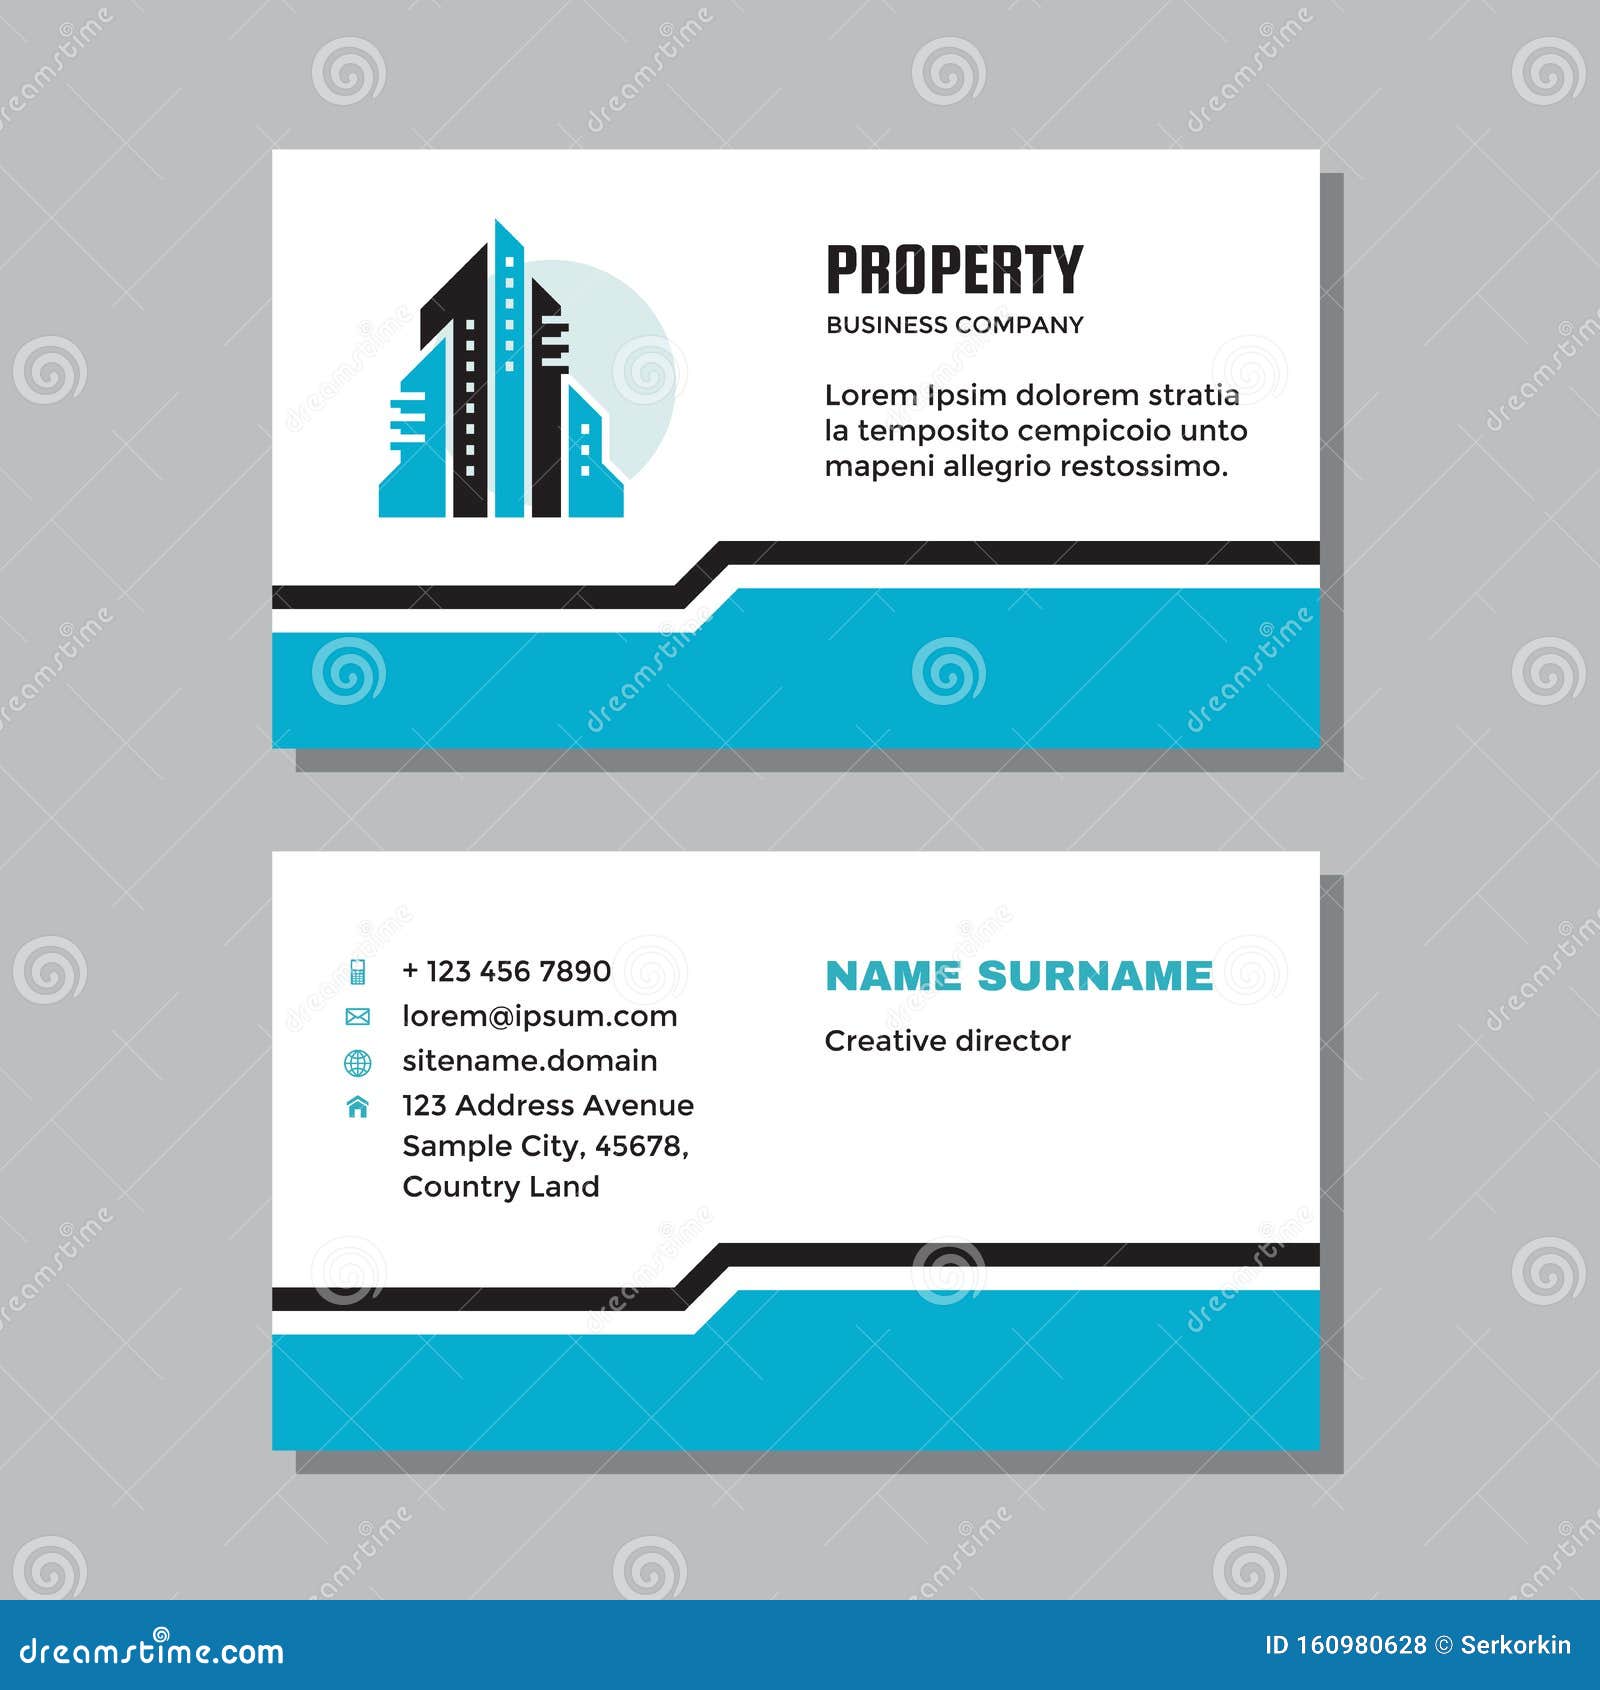 Business Visit Card Template with Logo - Concept Design. Real In Real Estate Business Cards Templates Free